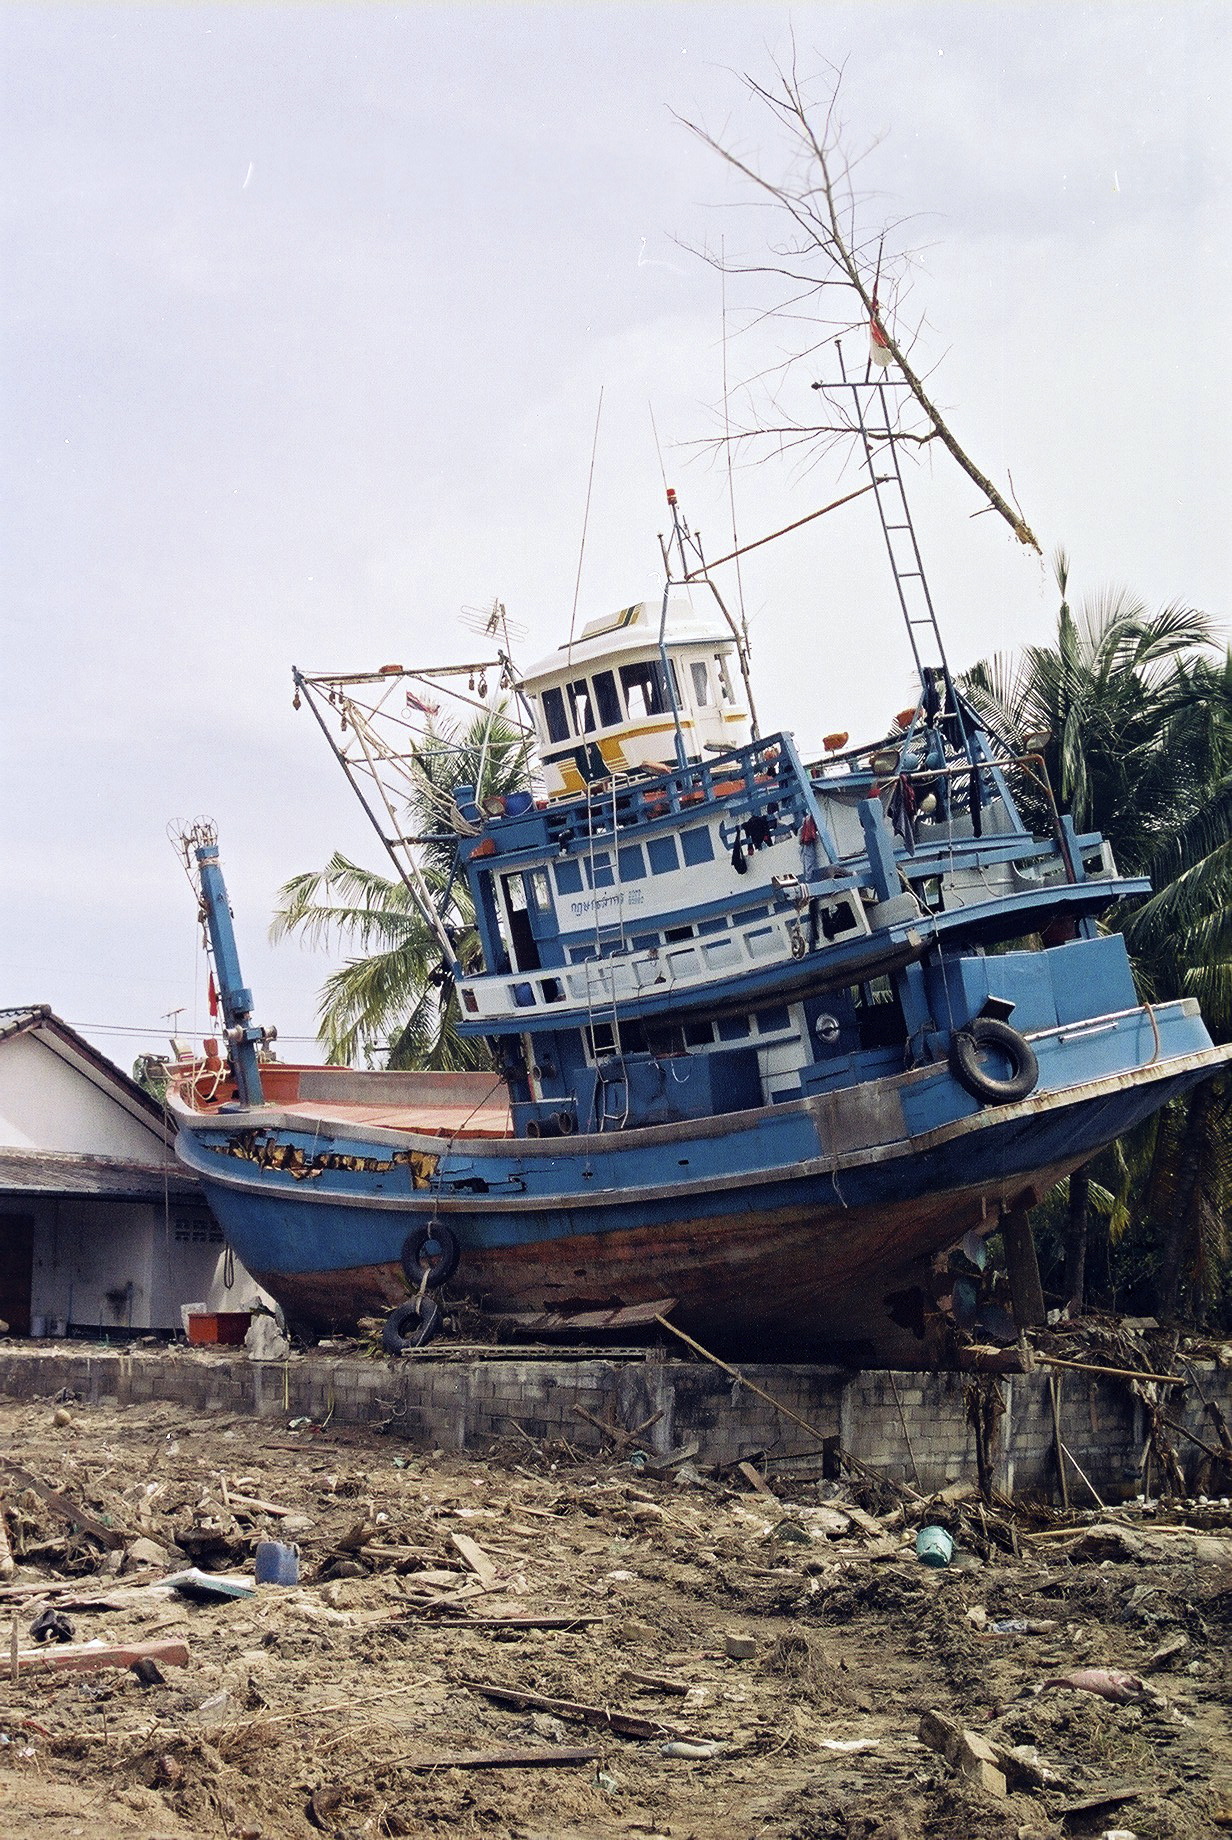 The fishing village of Baan Nam Khem was the worst hit stretch of coast from the Boxing Day tsunami.